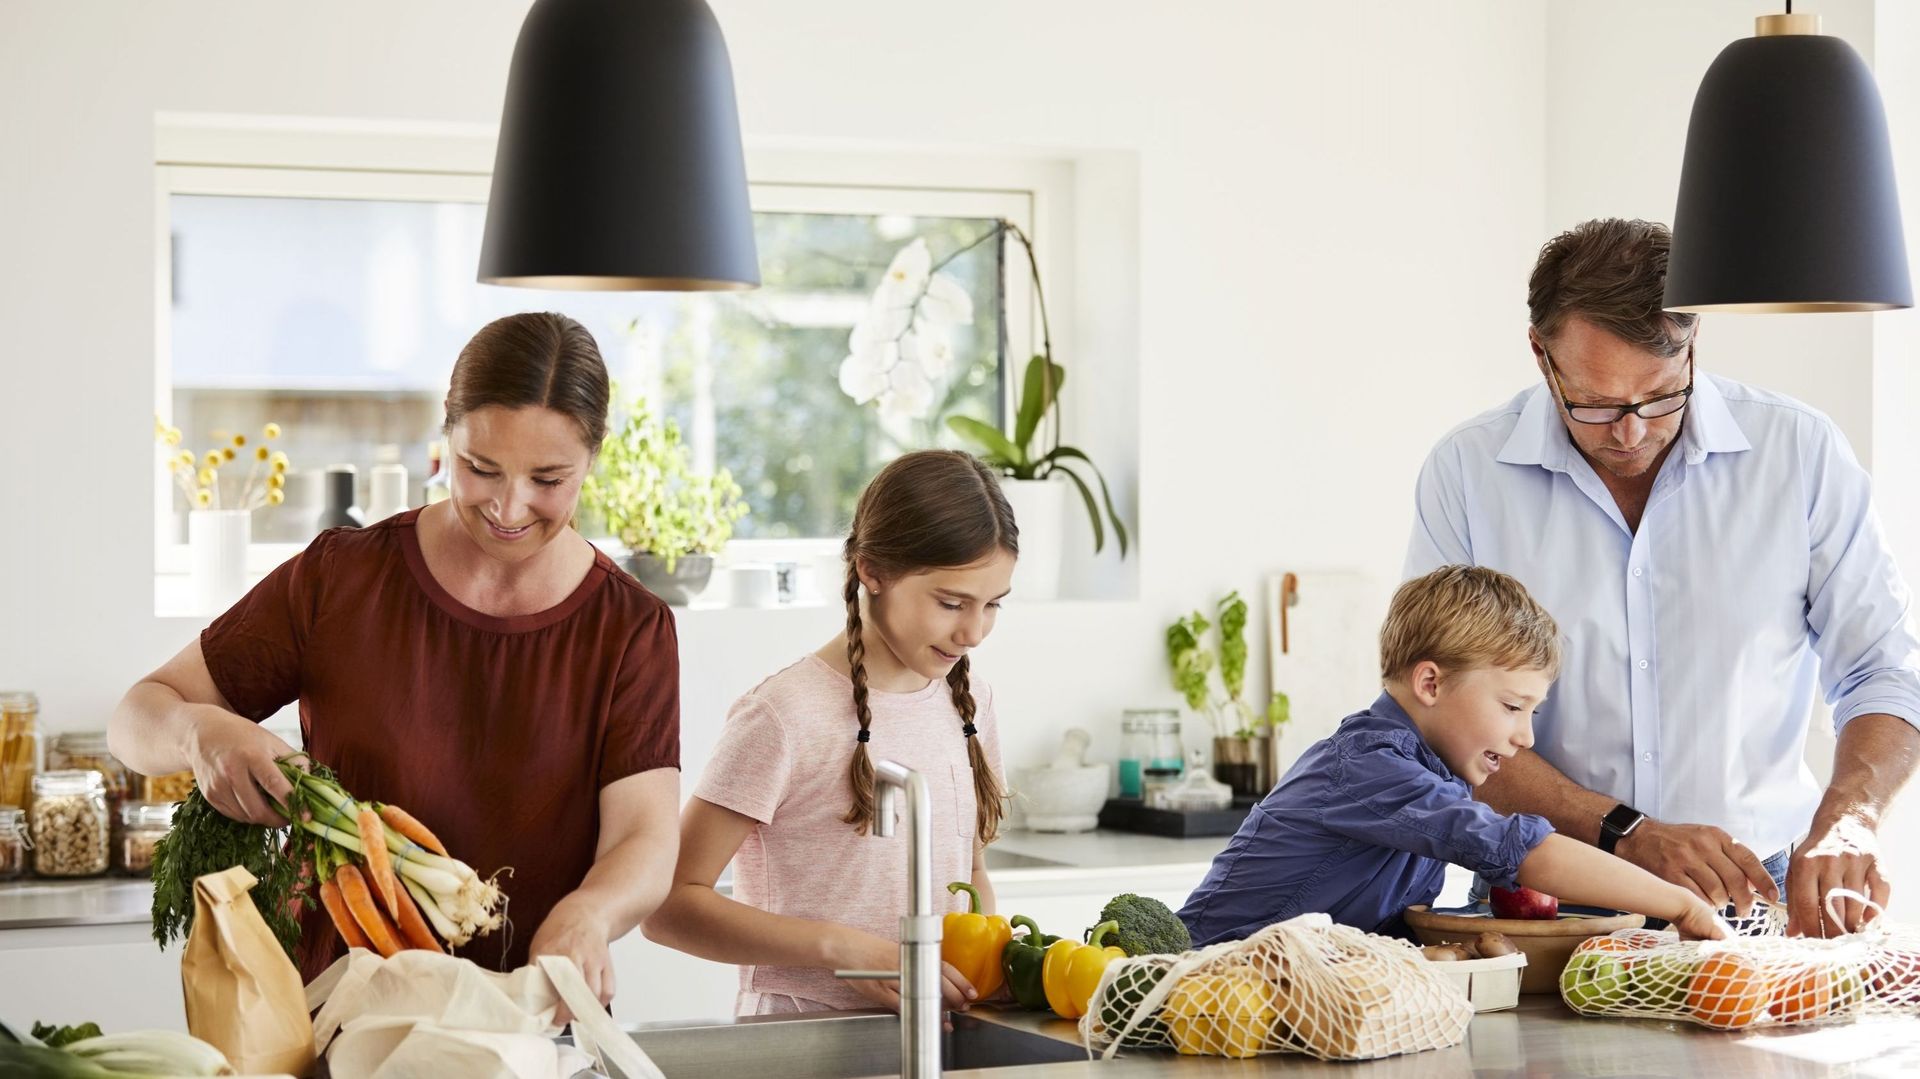 Parents and children unpacking grocery in kitchen